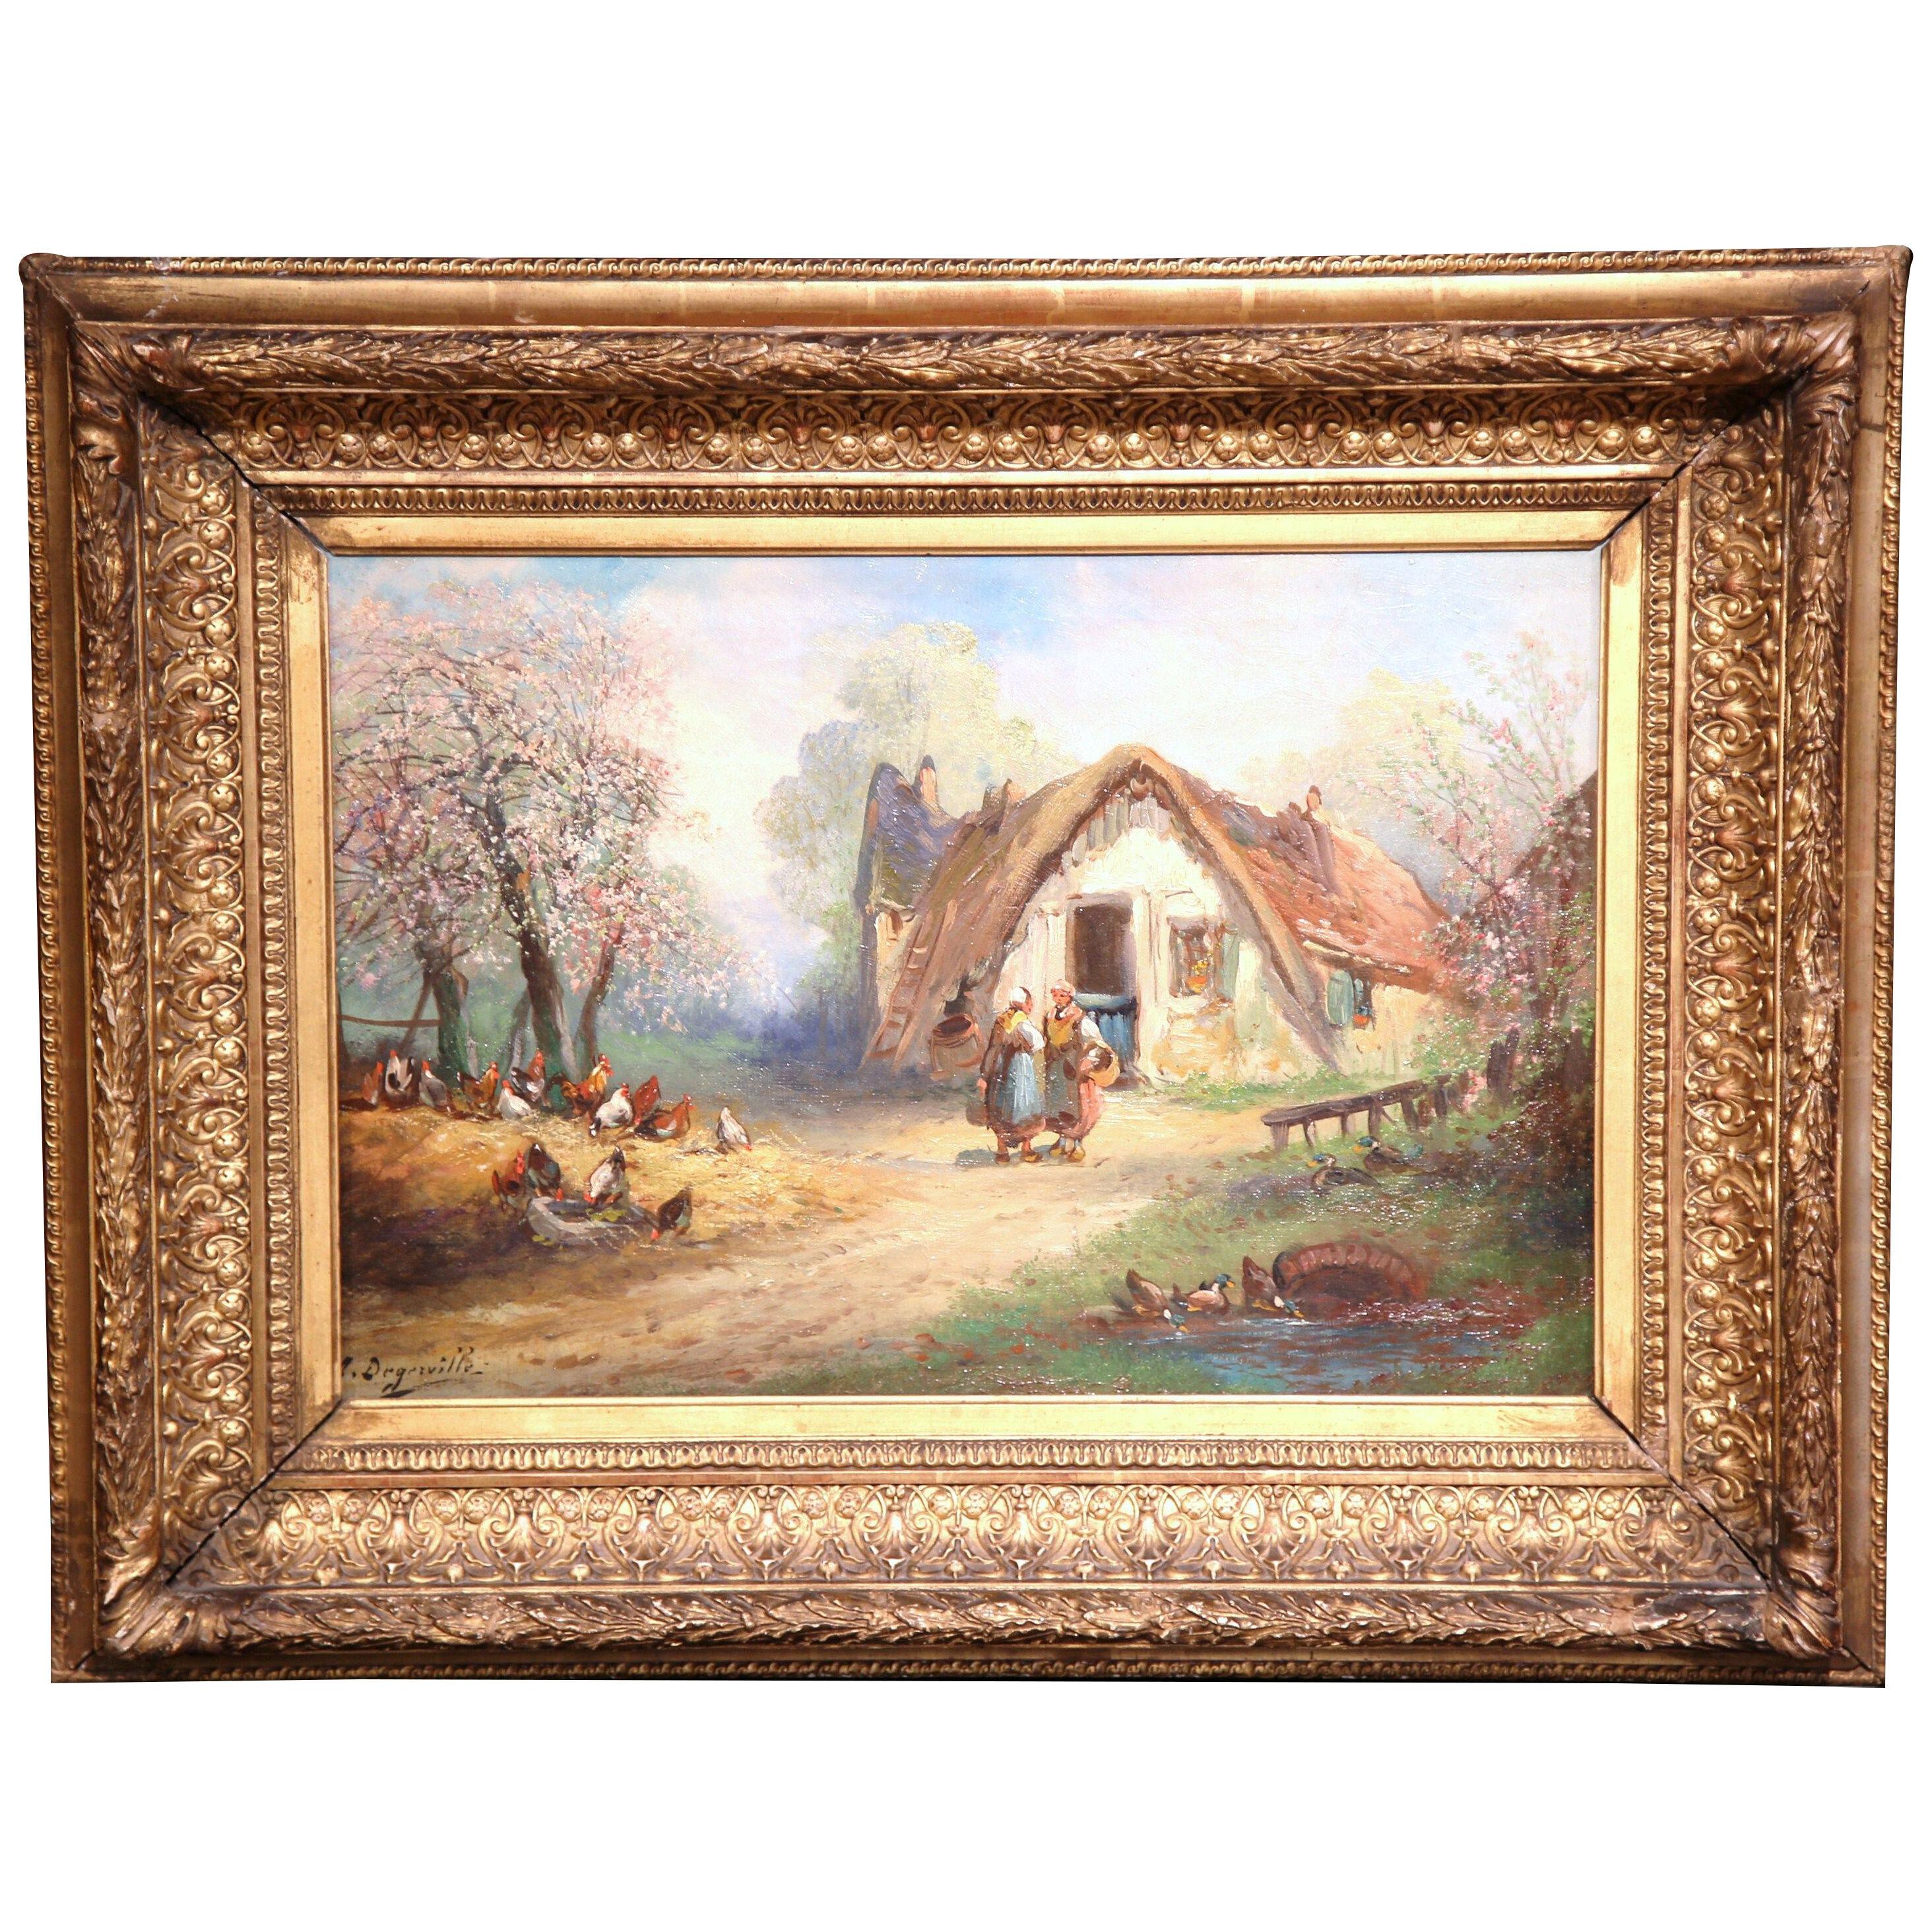 19th Century French Country Scene Oil Painting in Gilt Frame Signed A Degerville